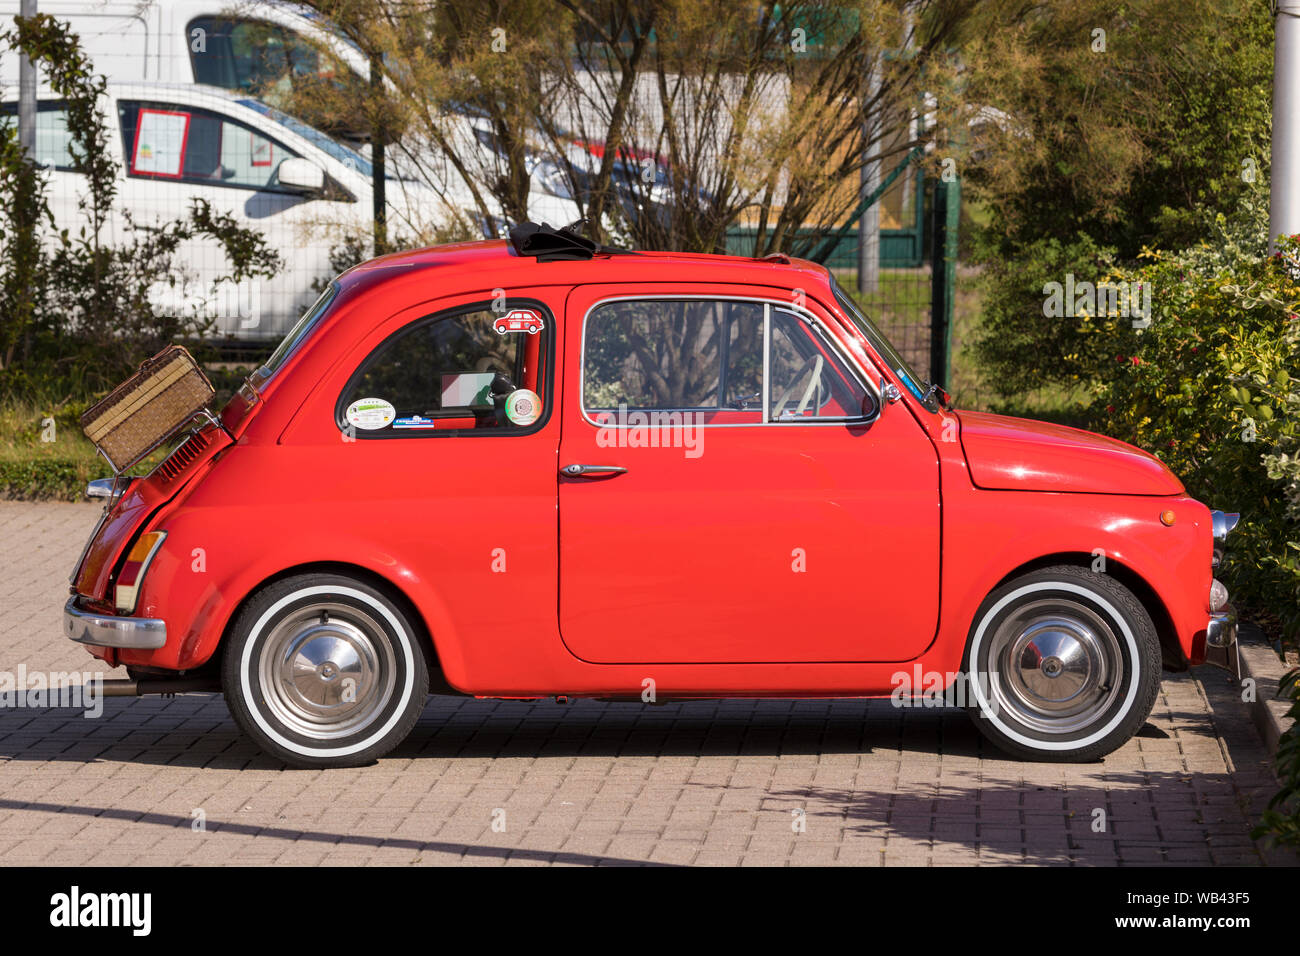 Stade, Germany - August 22, 2019: A  red vintage FIAT 500 or Cinquecento in a parking lot. Stock Photo